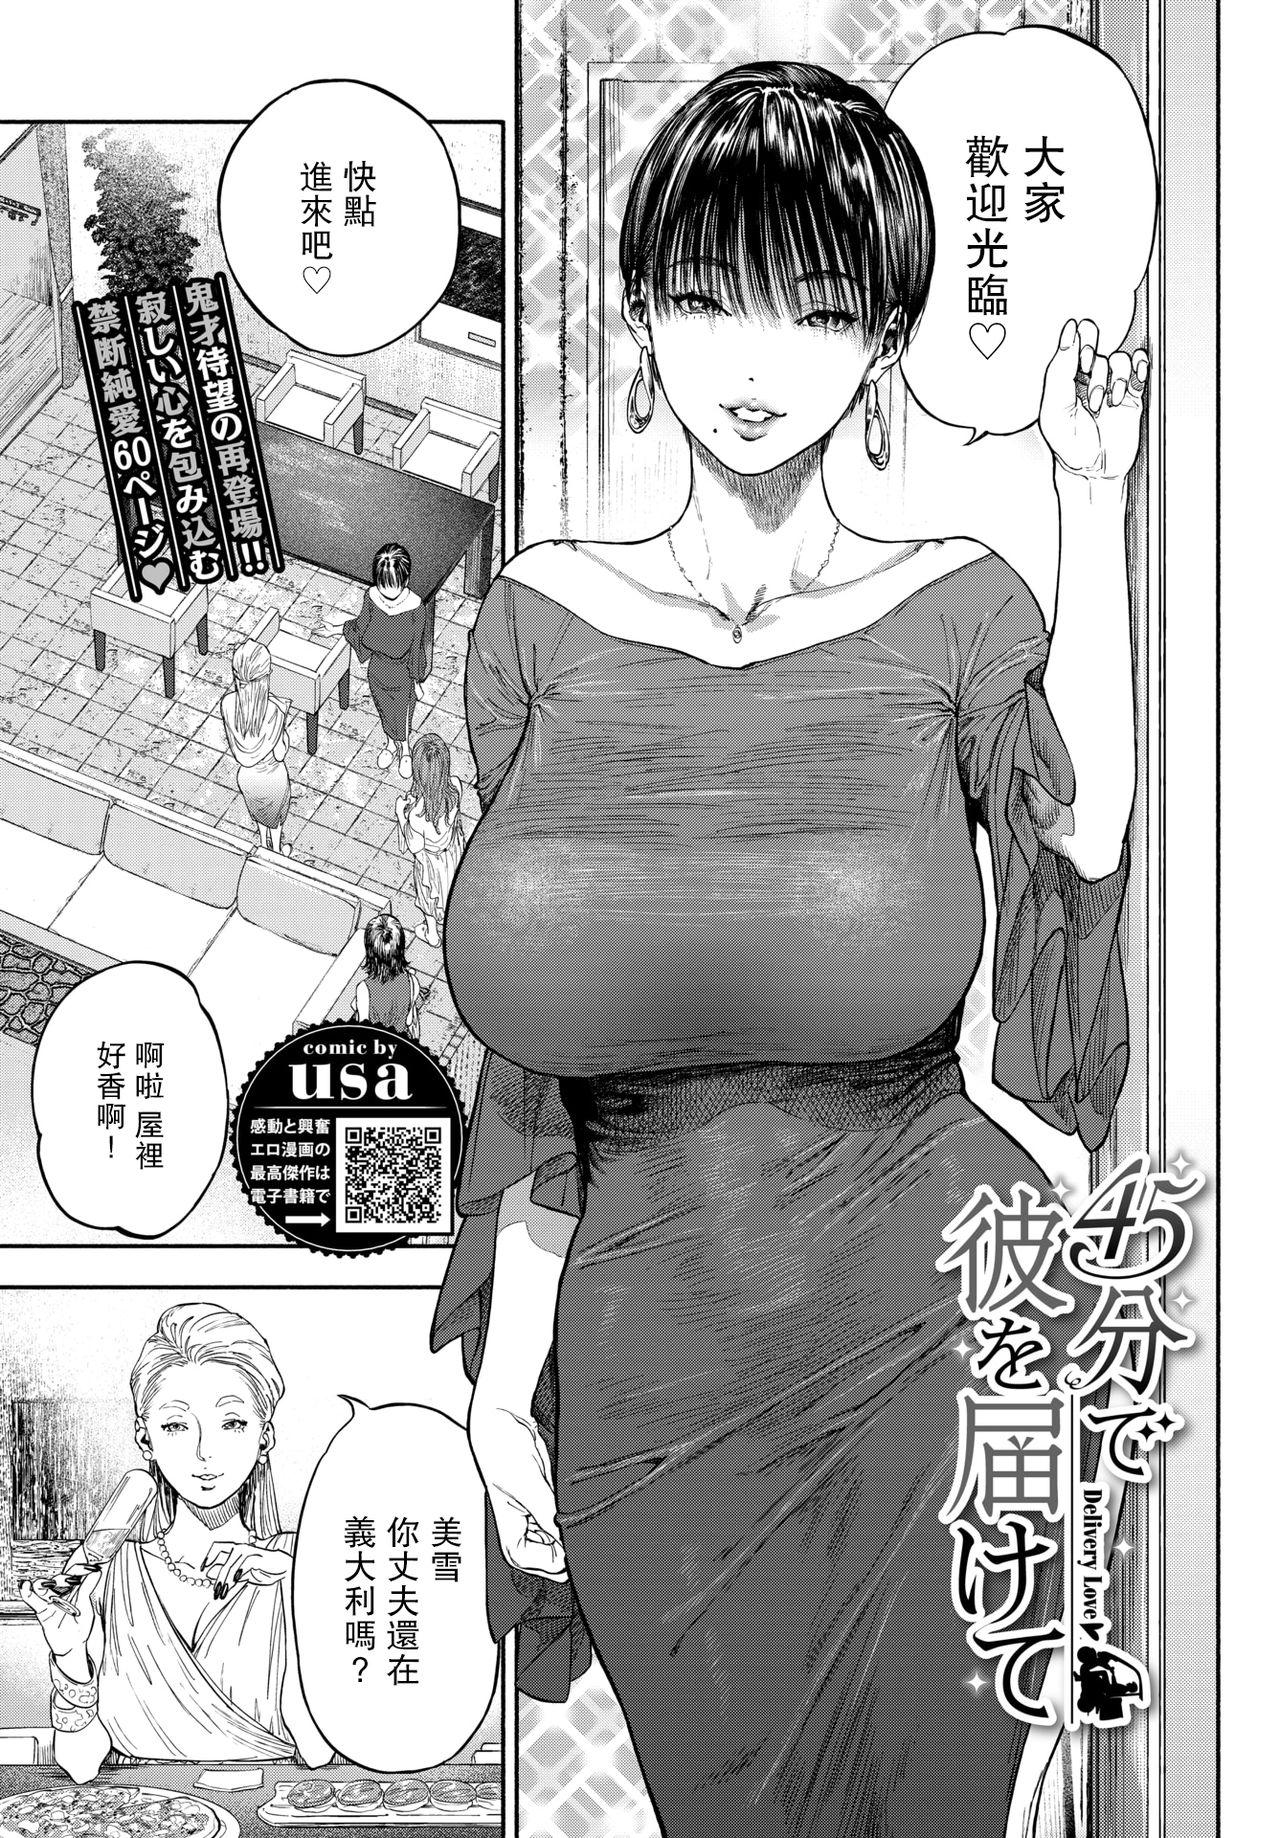 Natural Boobs [usa] 45-fun de Kare o Todokete - Delivery Love (COMIC BAVEL 2020-12) [Chinese] [路过的骑士汉化组] [Digital] Salope - Page 1